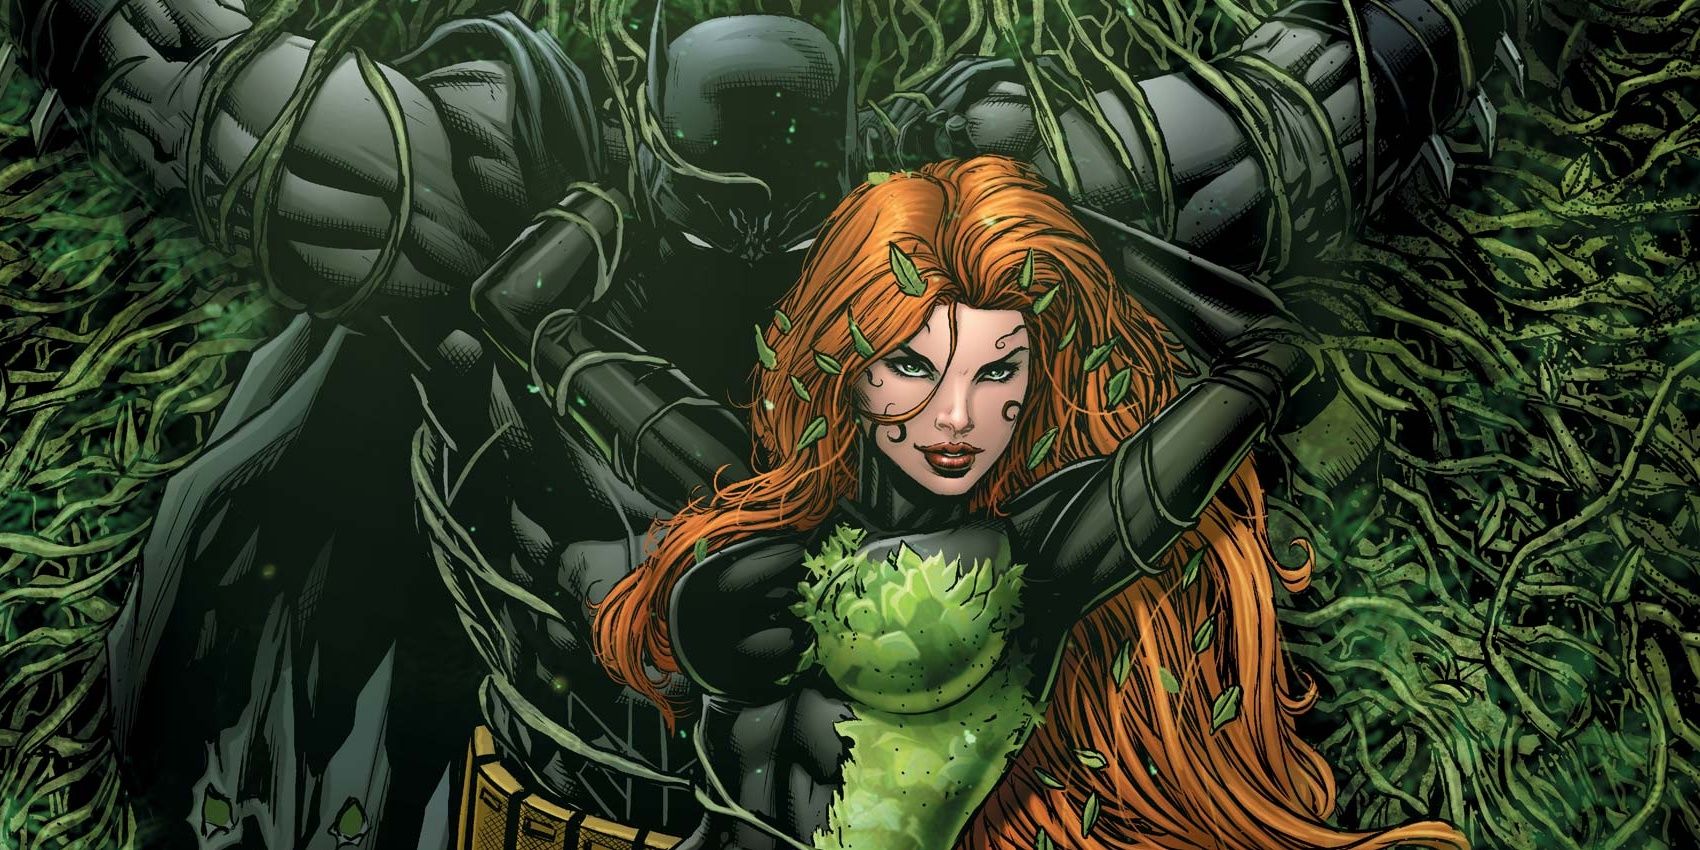 Poison Ivy Could Be DCs Greatest Hero (But Chooses Not To)